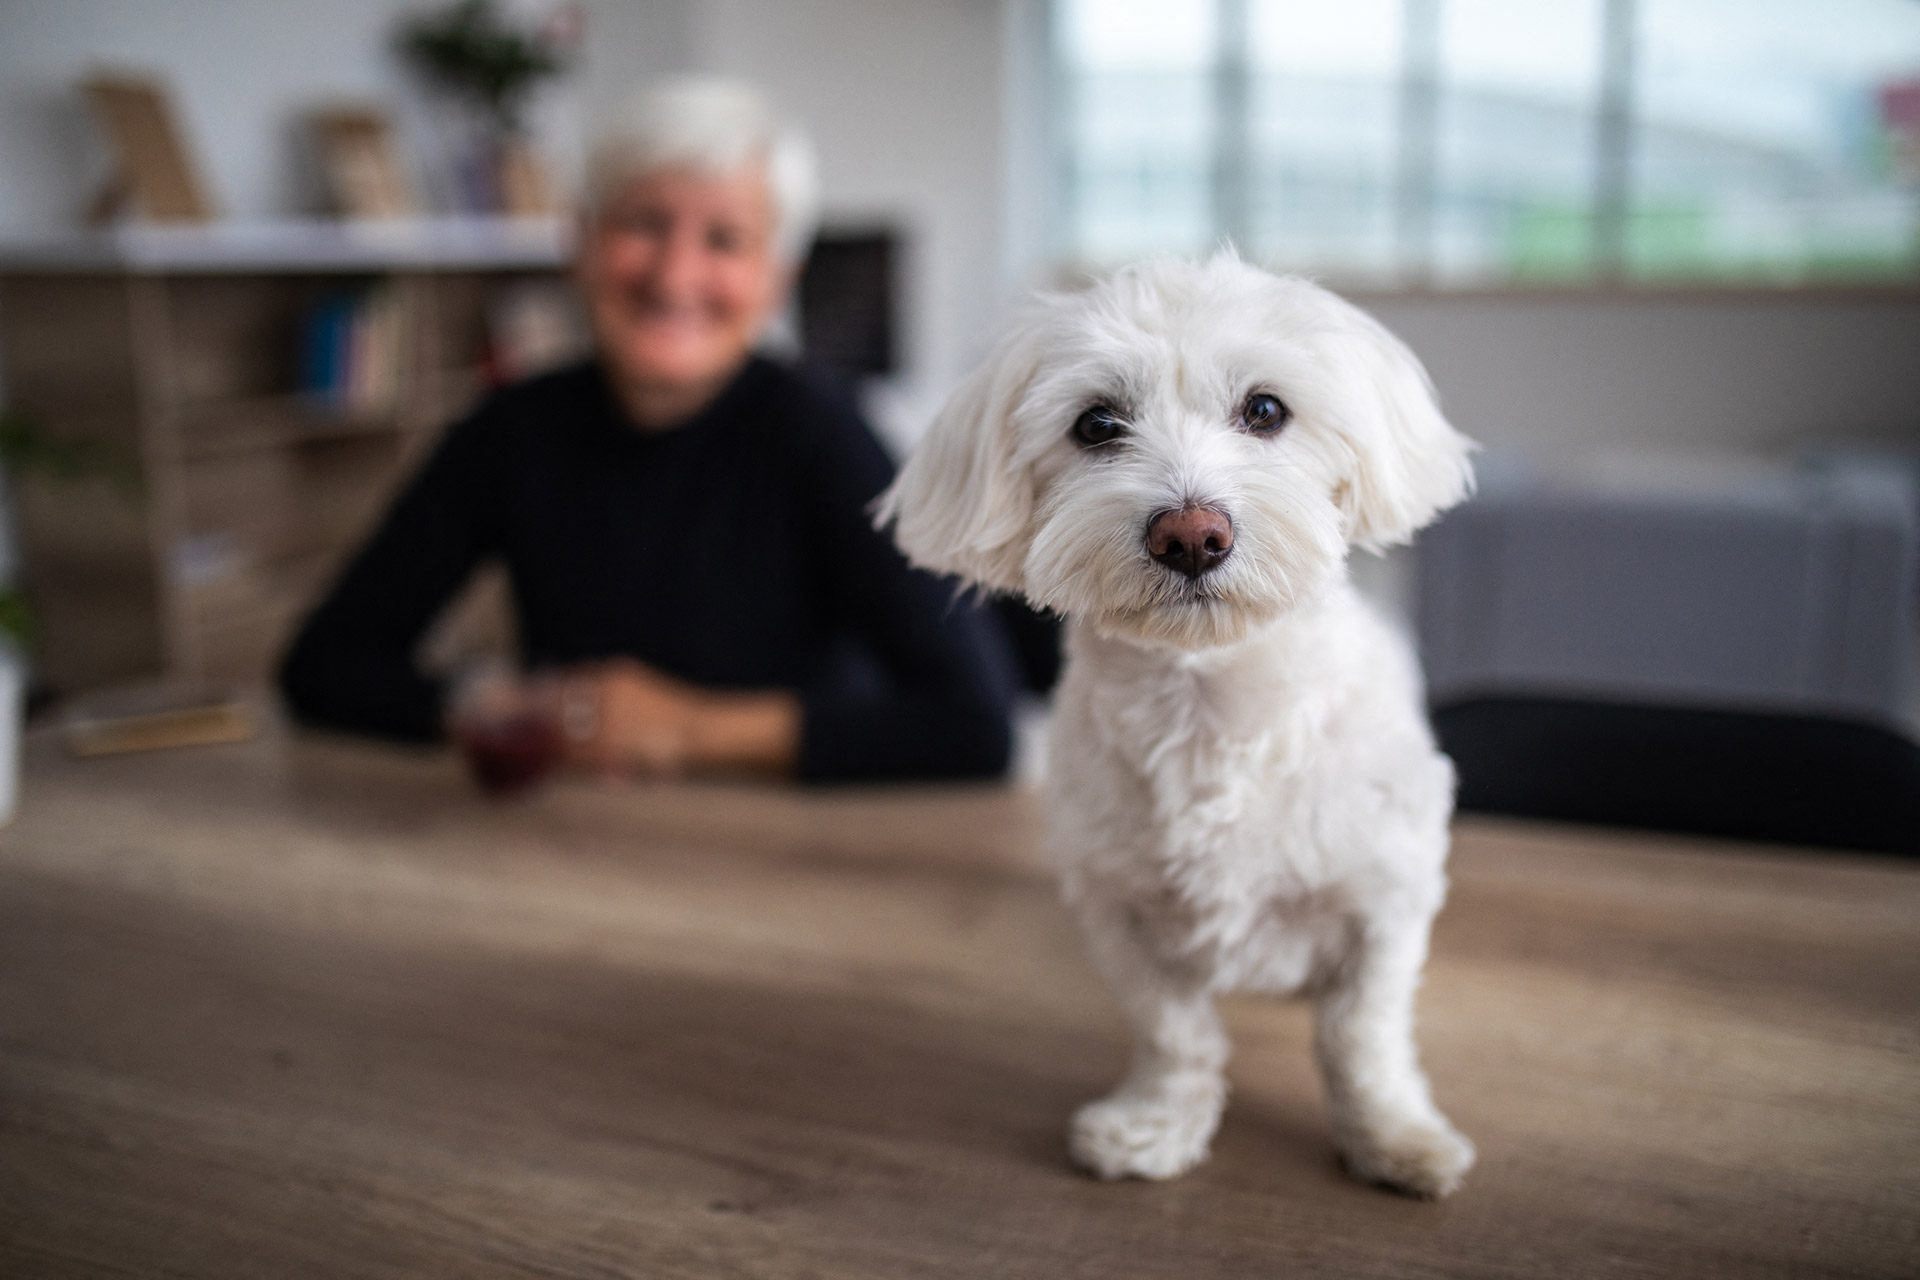 A pet's unconditional love brings joy and companionship to the lives of many seniors. Our welcoming pet policy underscores the importance of the strong bond between pets and their owners.